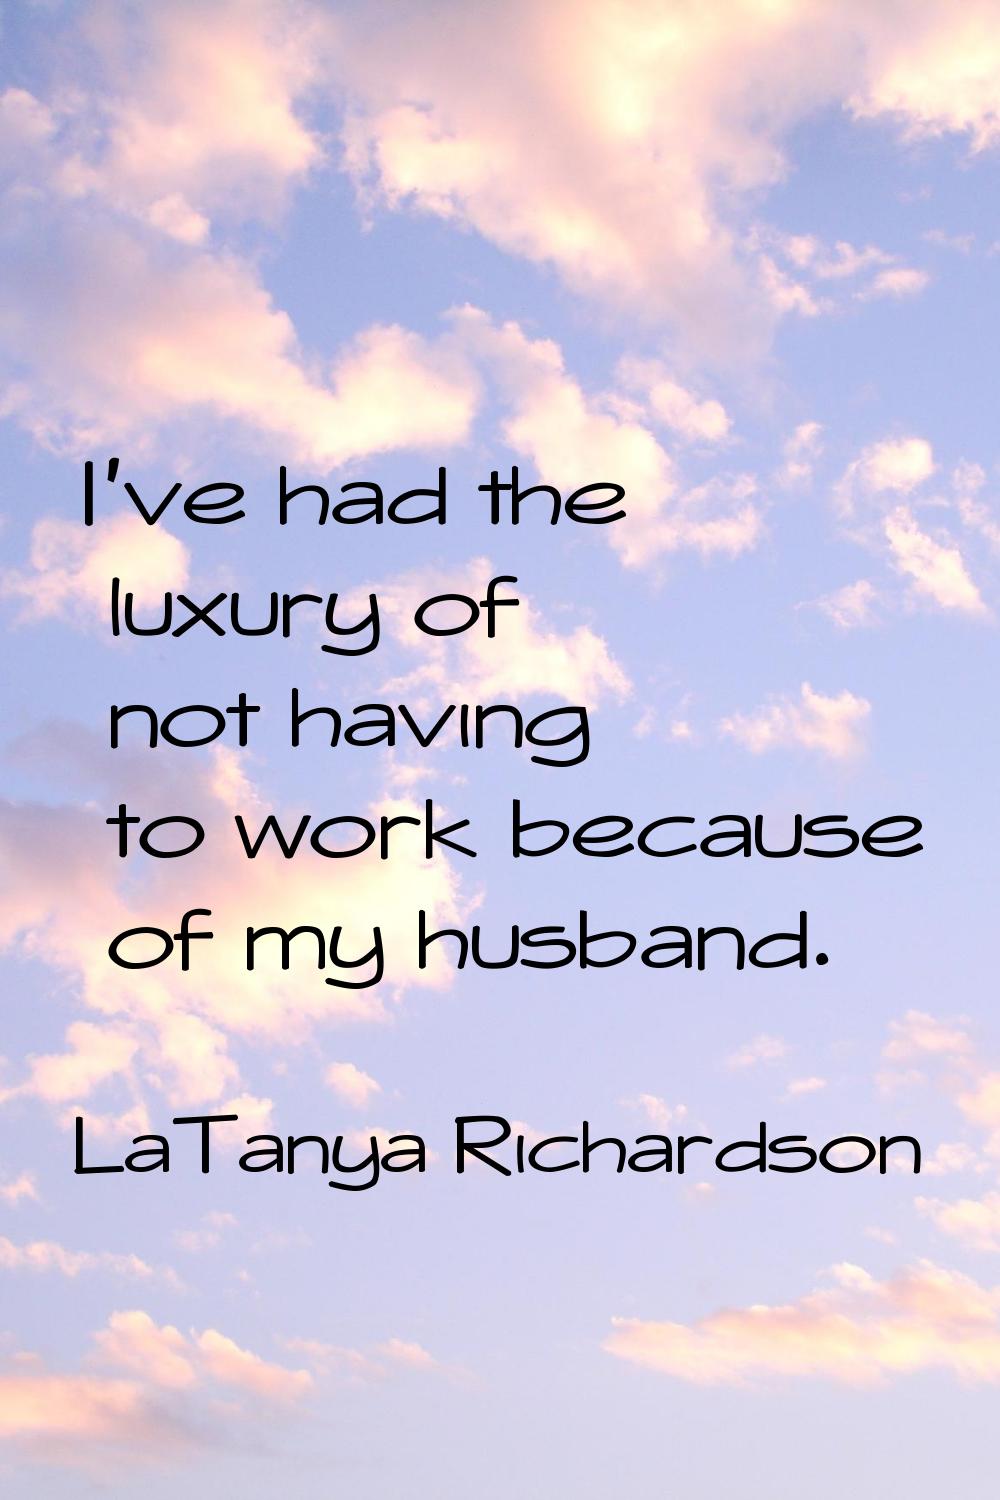 I've had the luxury of not having to work because of my husband.